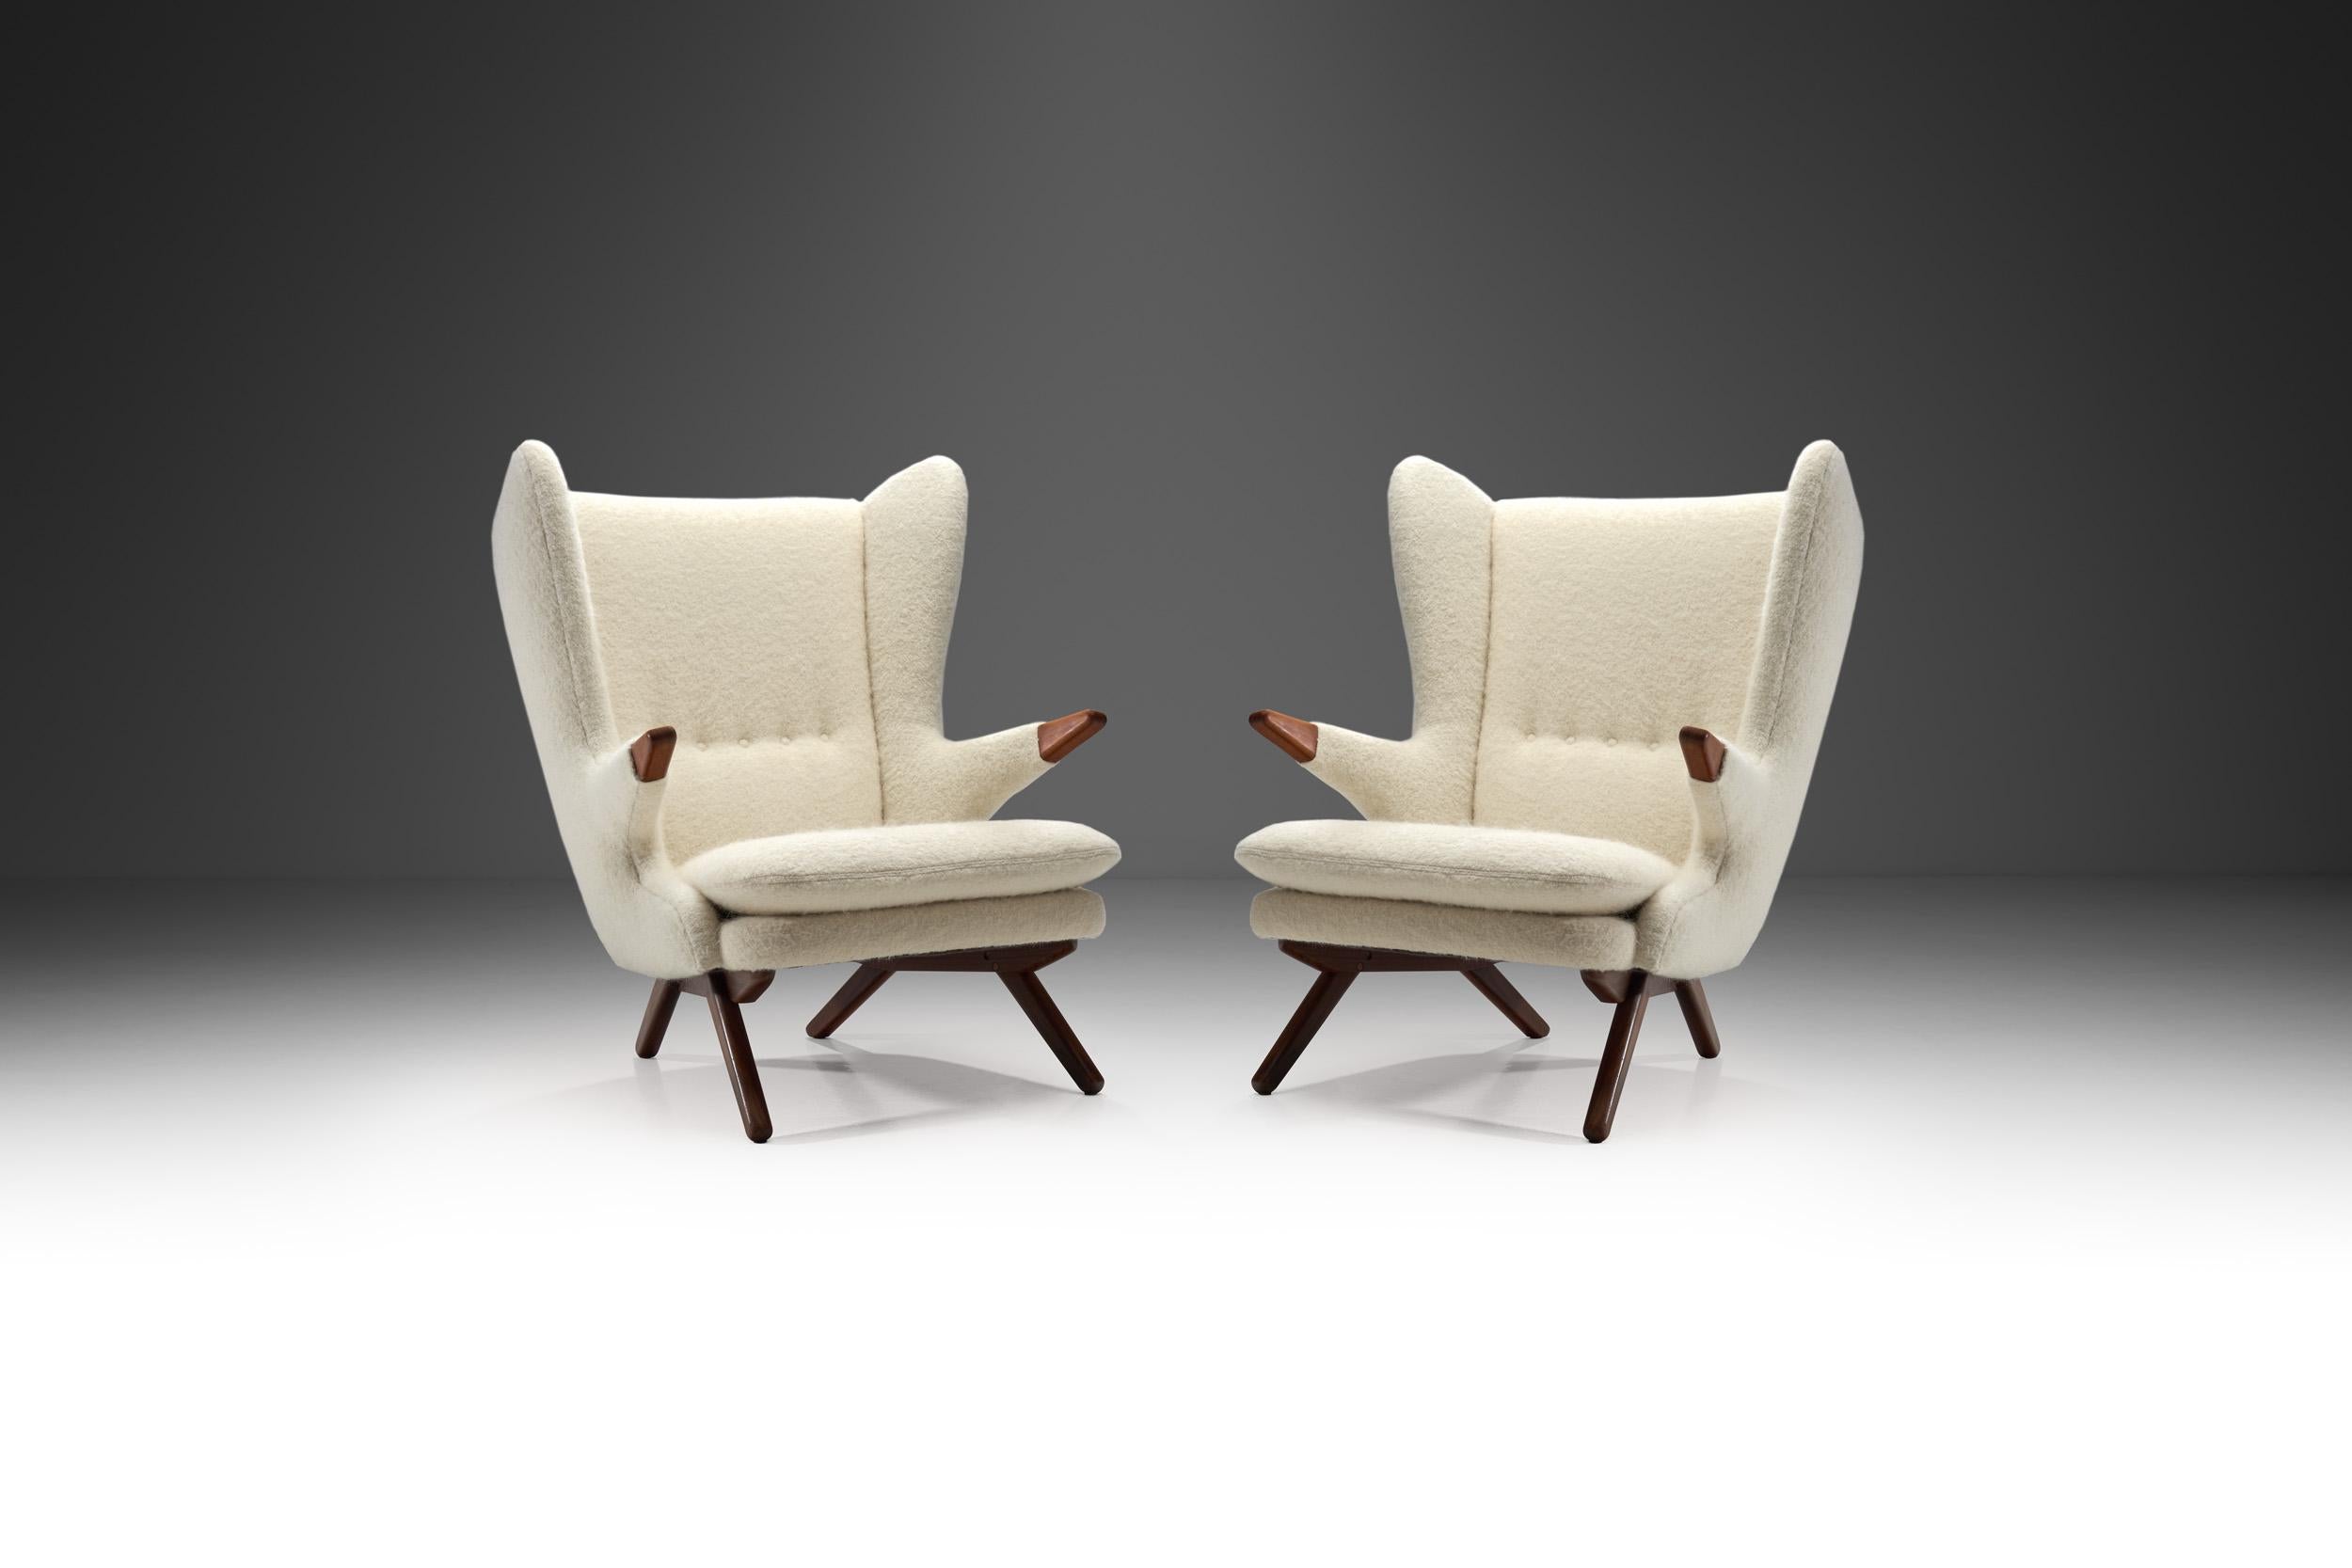 This pair is the most recognizable model of Danish designer and manufacturer, Svend Skipper, and a great example of the mid-century design era. Skipper only created commissioned pieces, meaning none of his designs were mass-produced.

“Model 91”